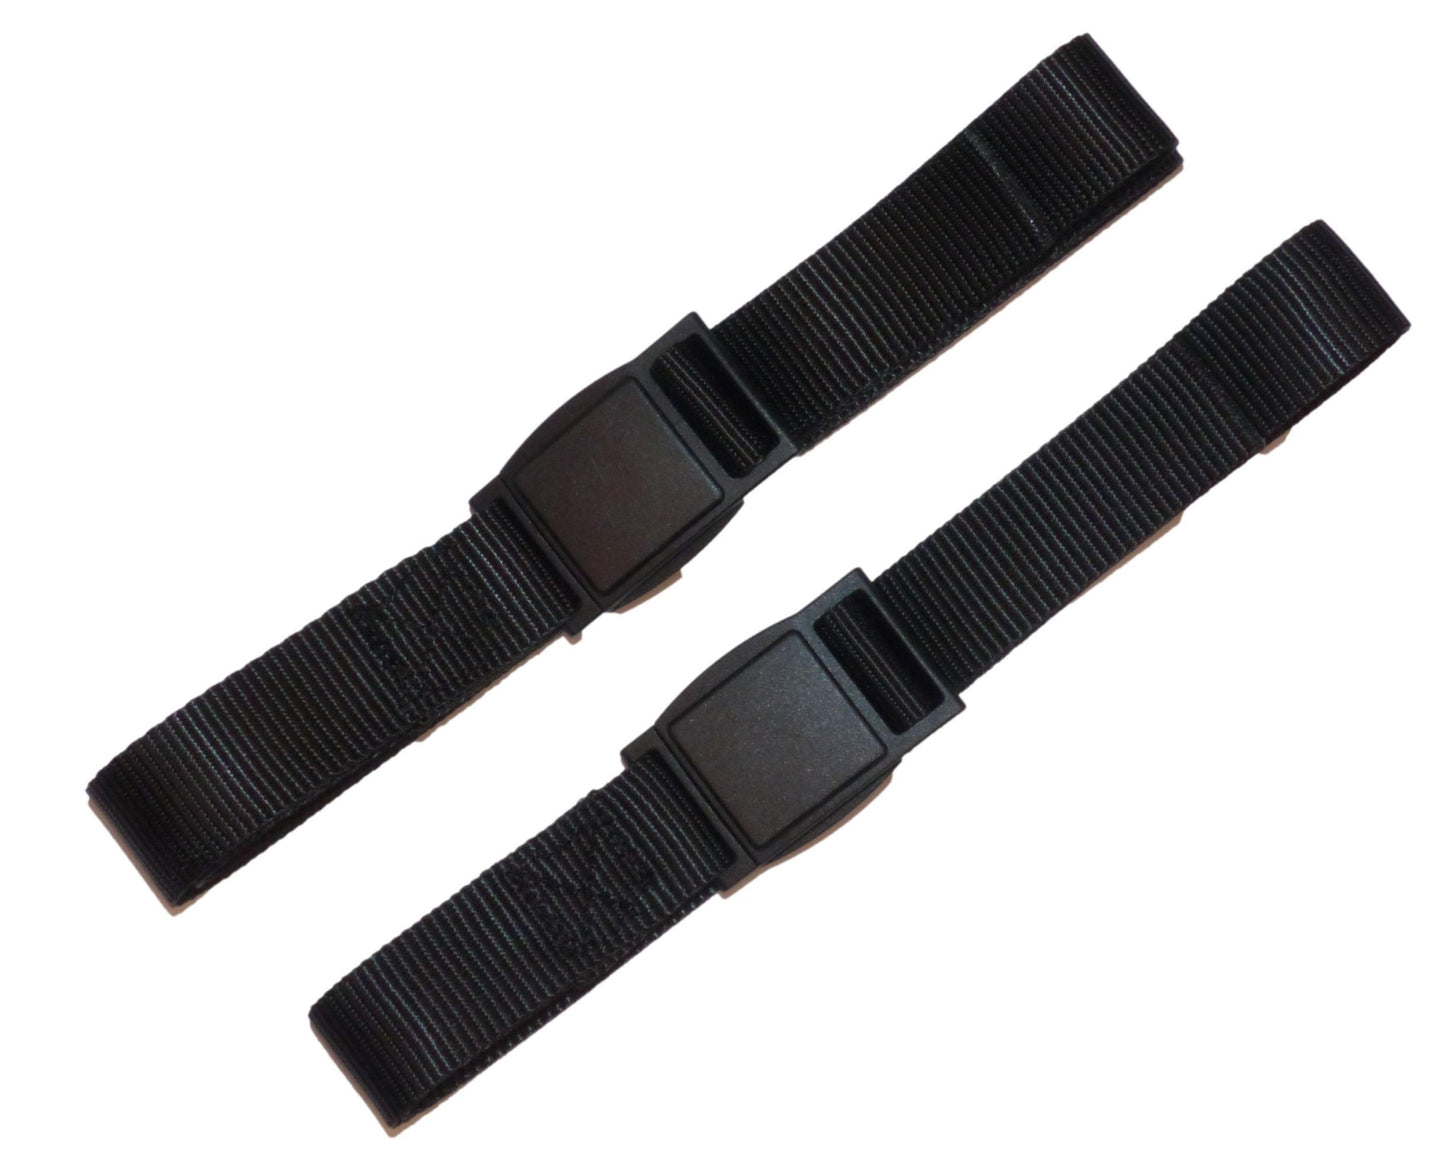 25mm Strap with Fidlock Quick Release Buckle (Pair) in black